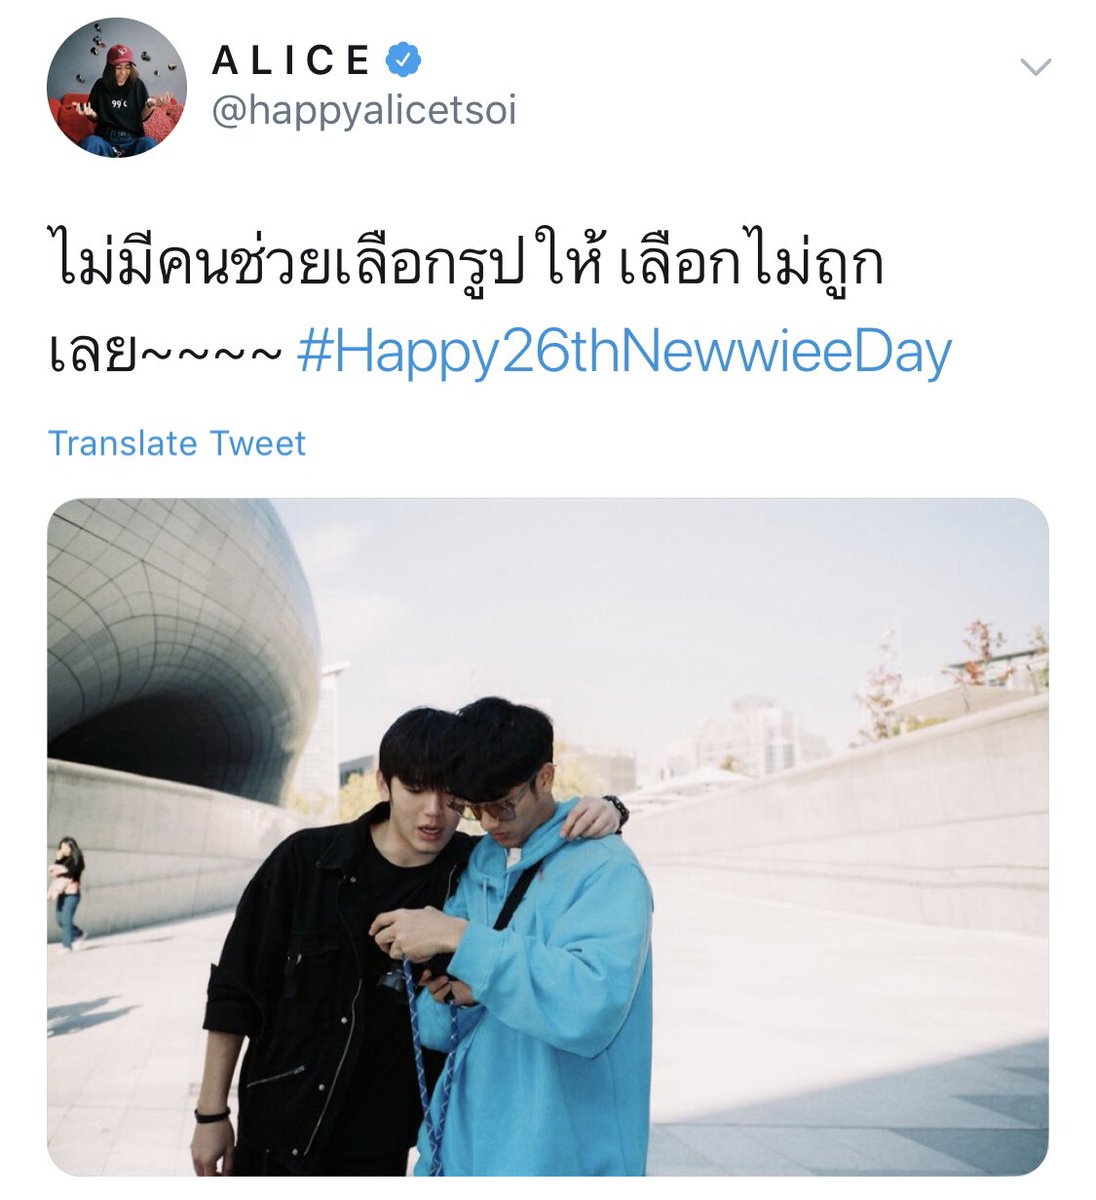 nanon's birthdya greeting that made us lose our mindtay tawan hasn't greeted newwie yet when this was posted funny thing is that GMM peeps greeting pic for newwiee always has tay in it 